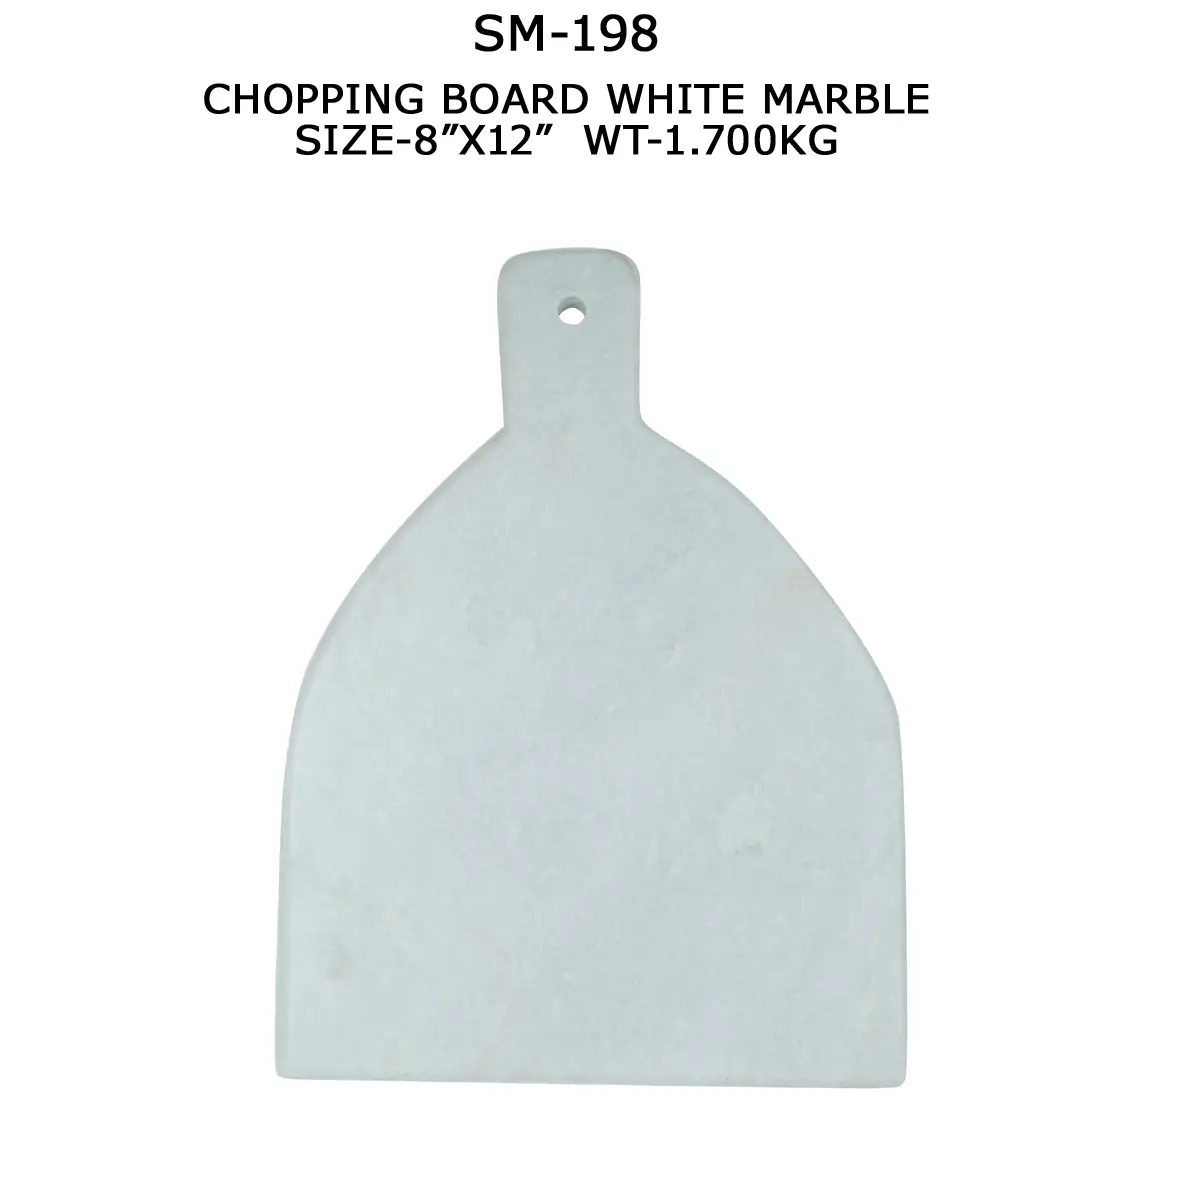 CHOPPING BOARD WHITE MARBLE